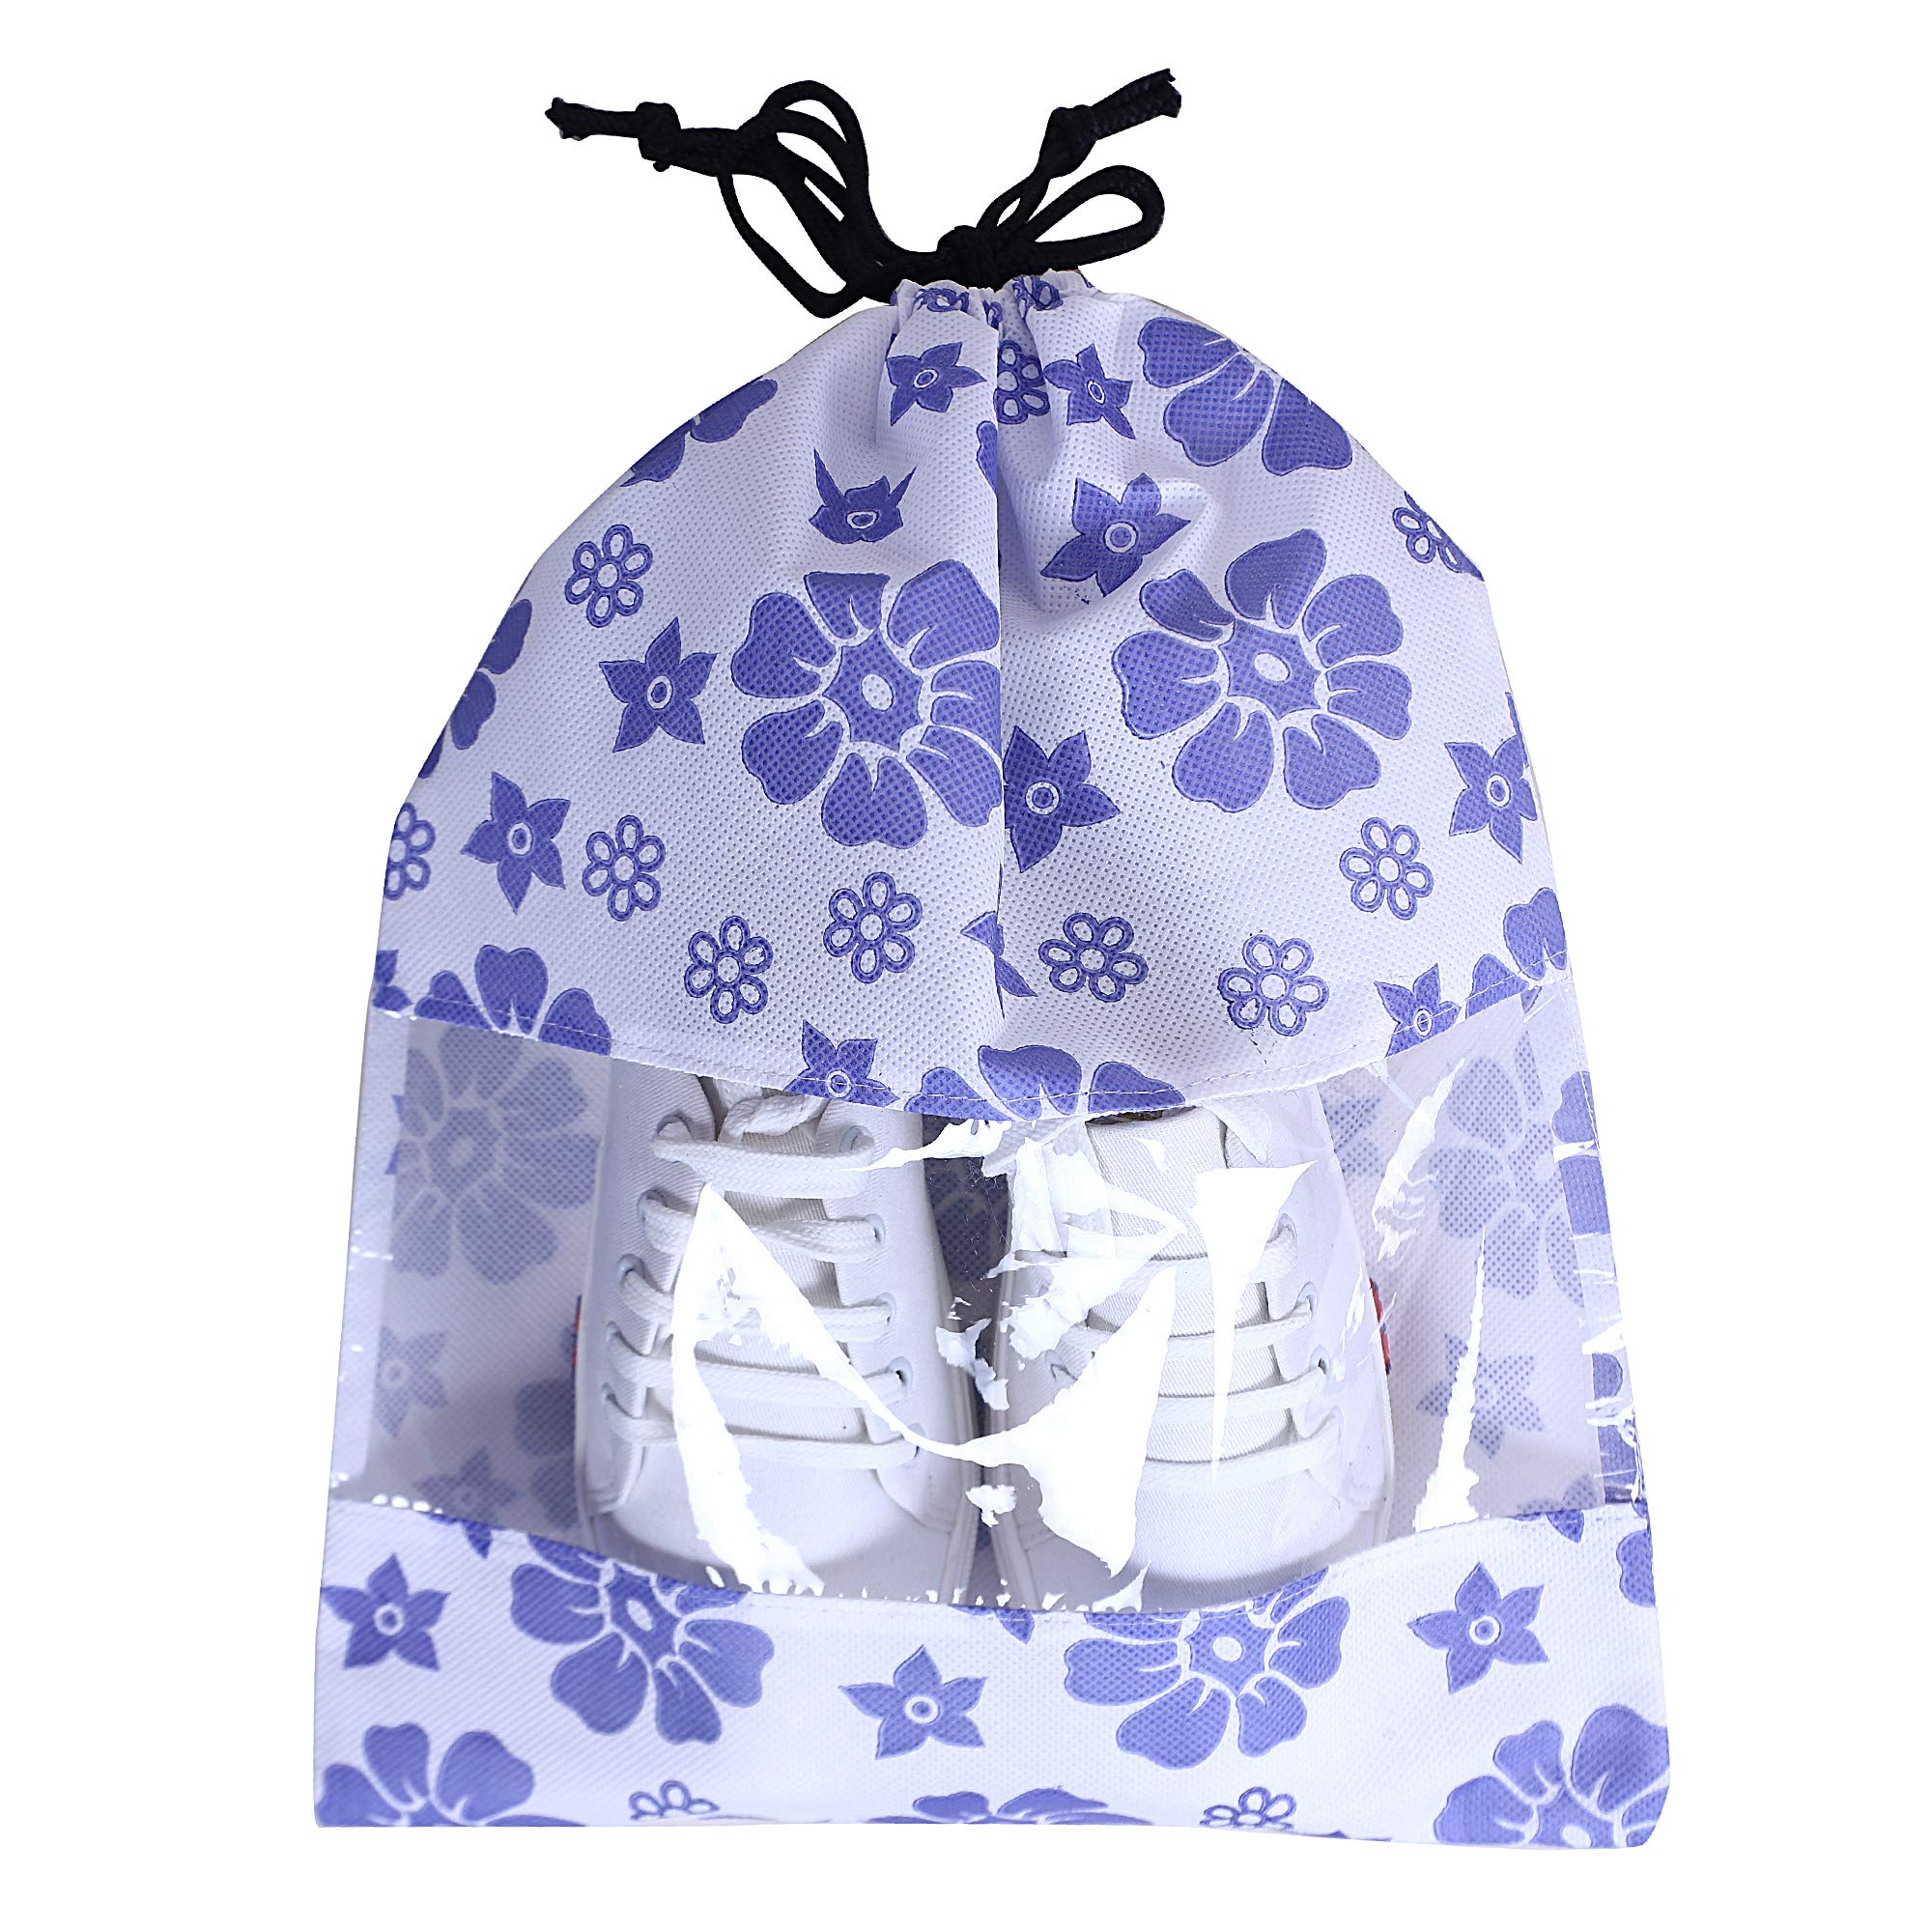 Kuber Industries Flower Design 24 Piece Non Woven Travel Shoe Cover, String Bag Organizer, Royal Blue -CTMTC039501